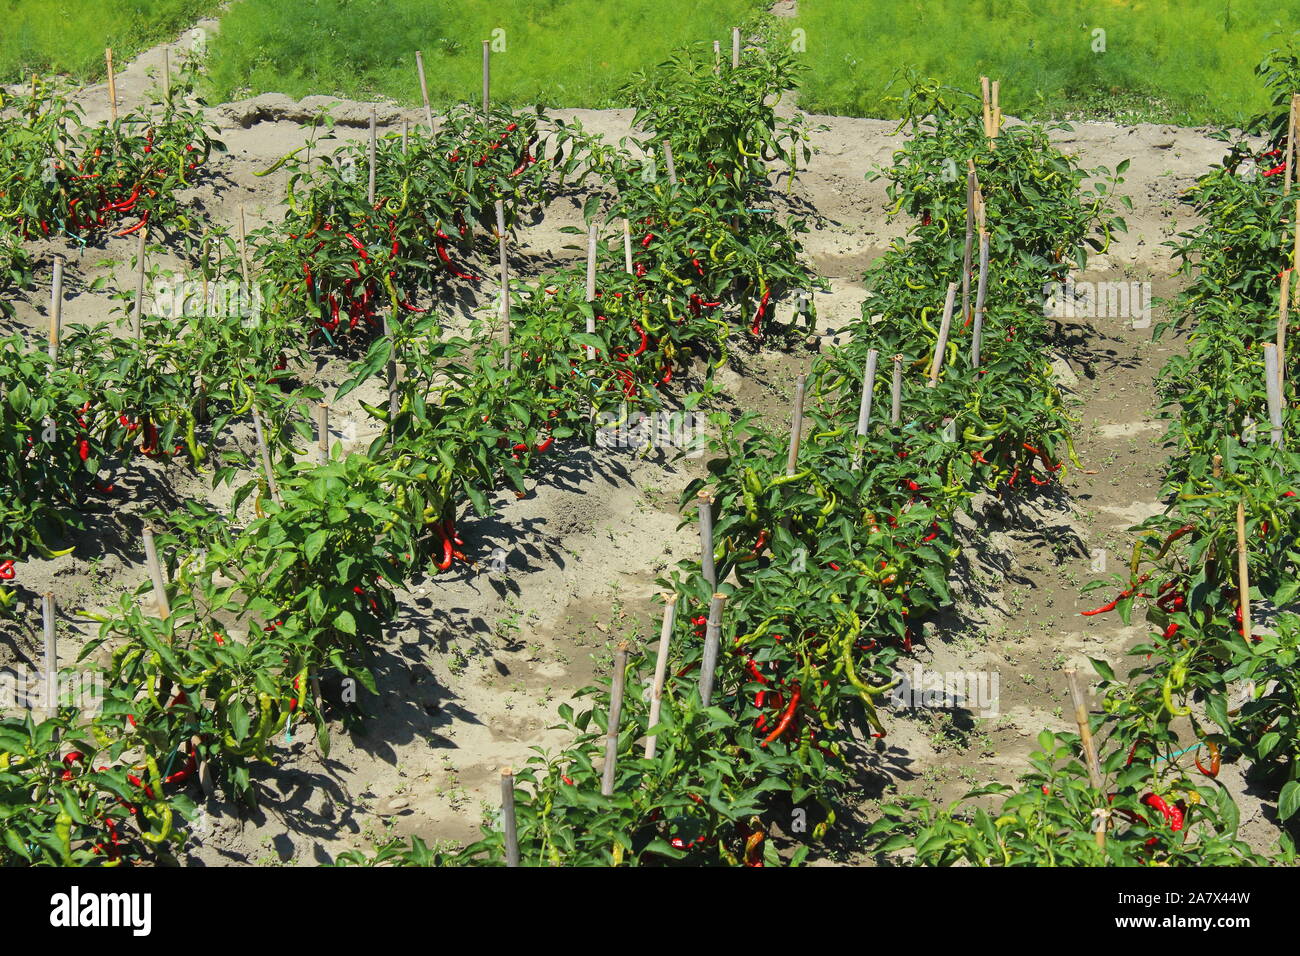 red and green chilies growing in a vegetable garden Stock Photo